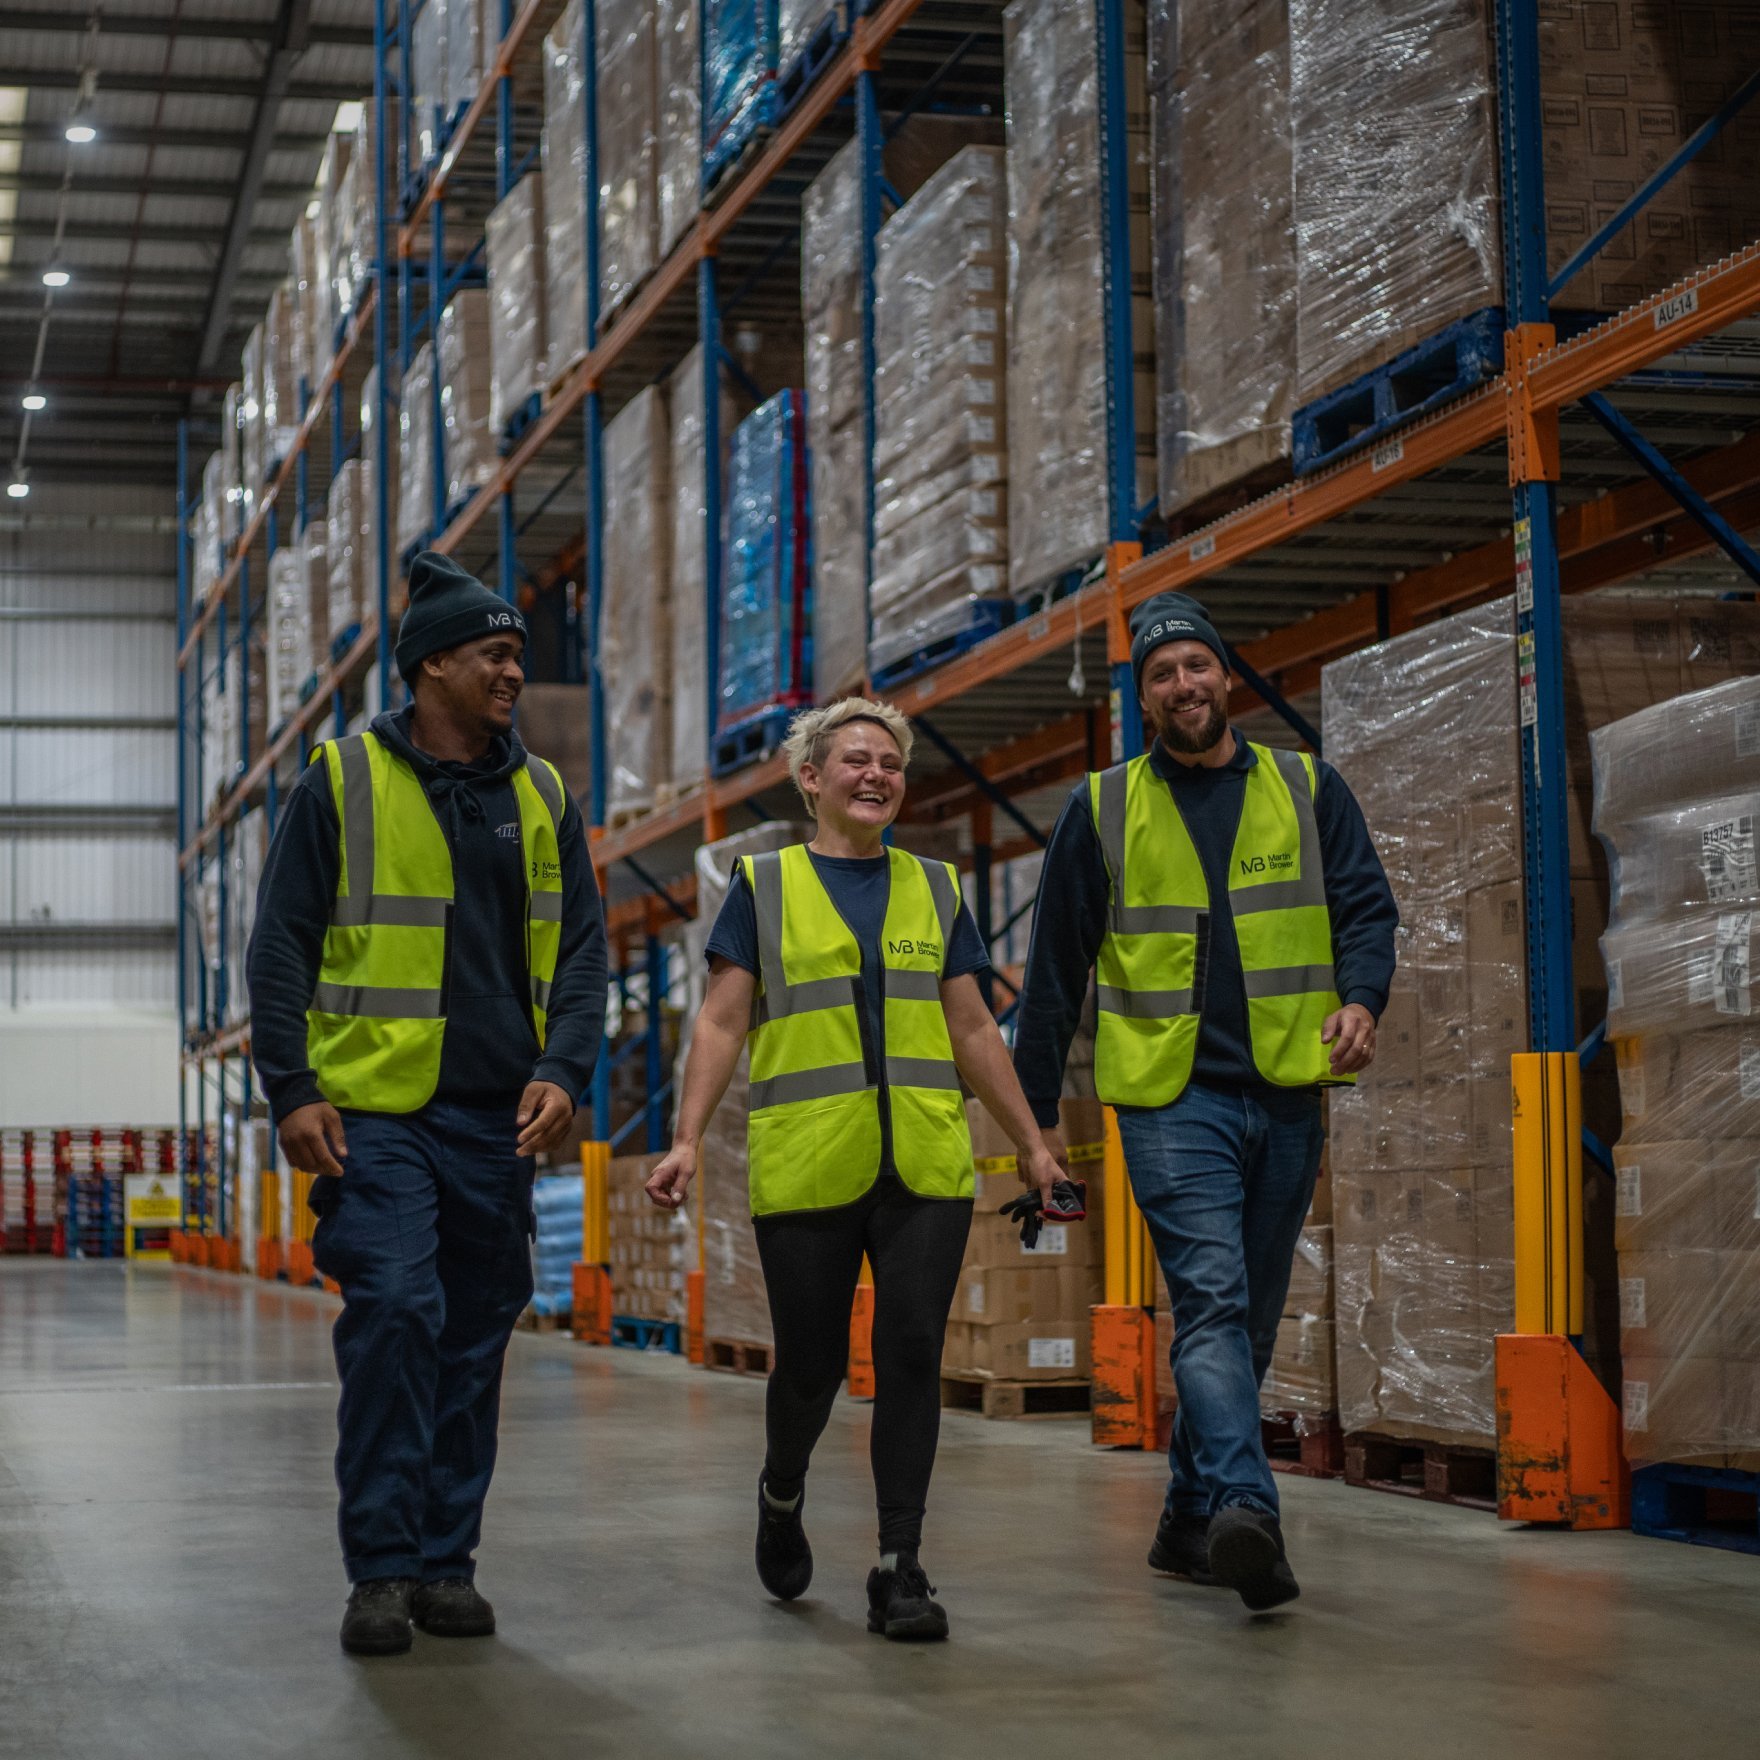 Three people in yellow vests smiling, walking and talking inside a distribution center